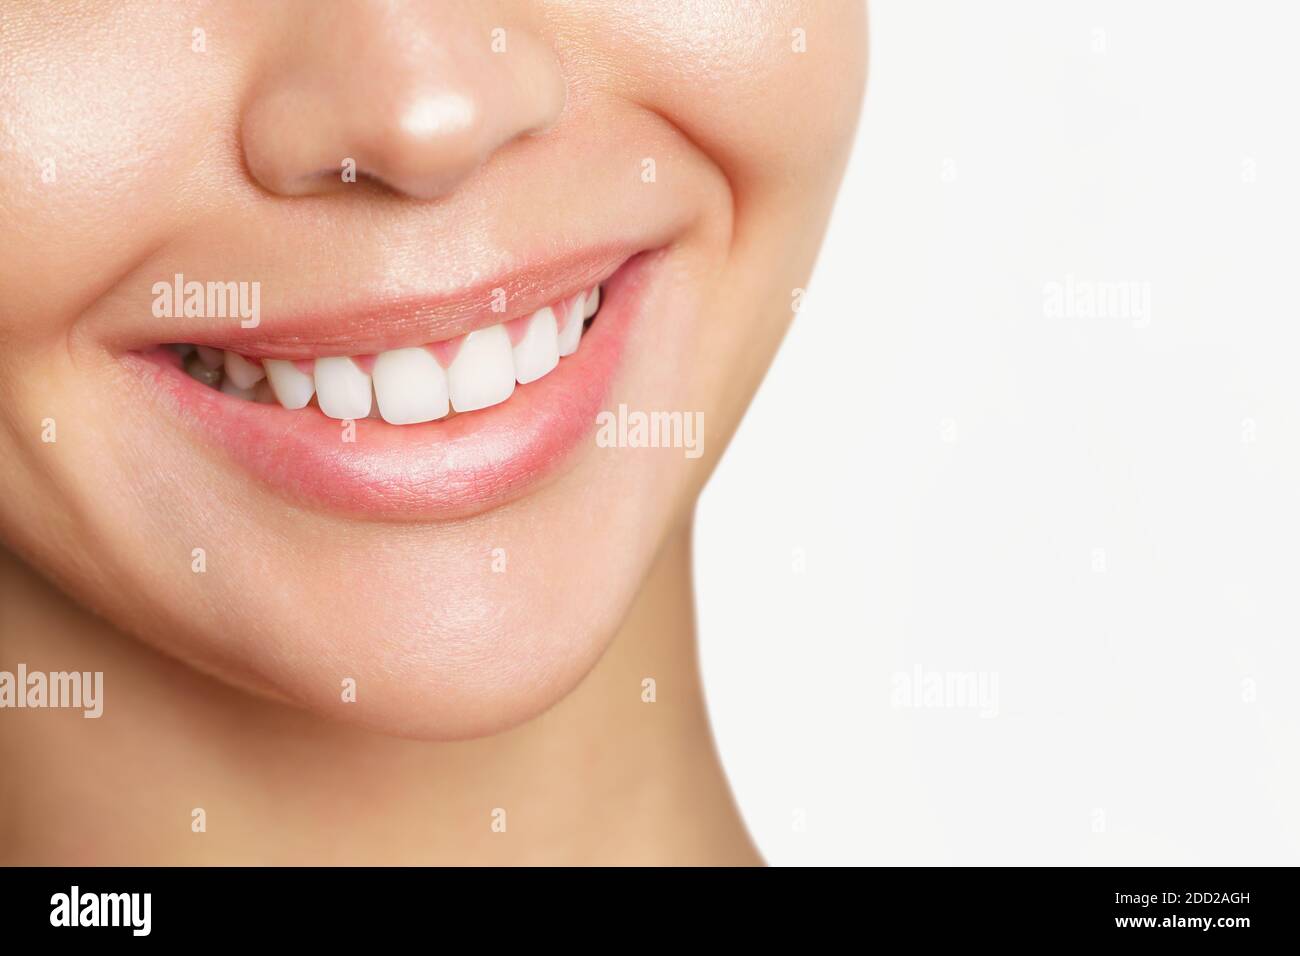 Beautiful young woman with healthy teeth on white background. Stock Photo